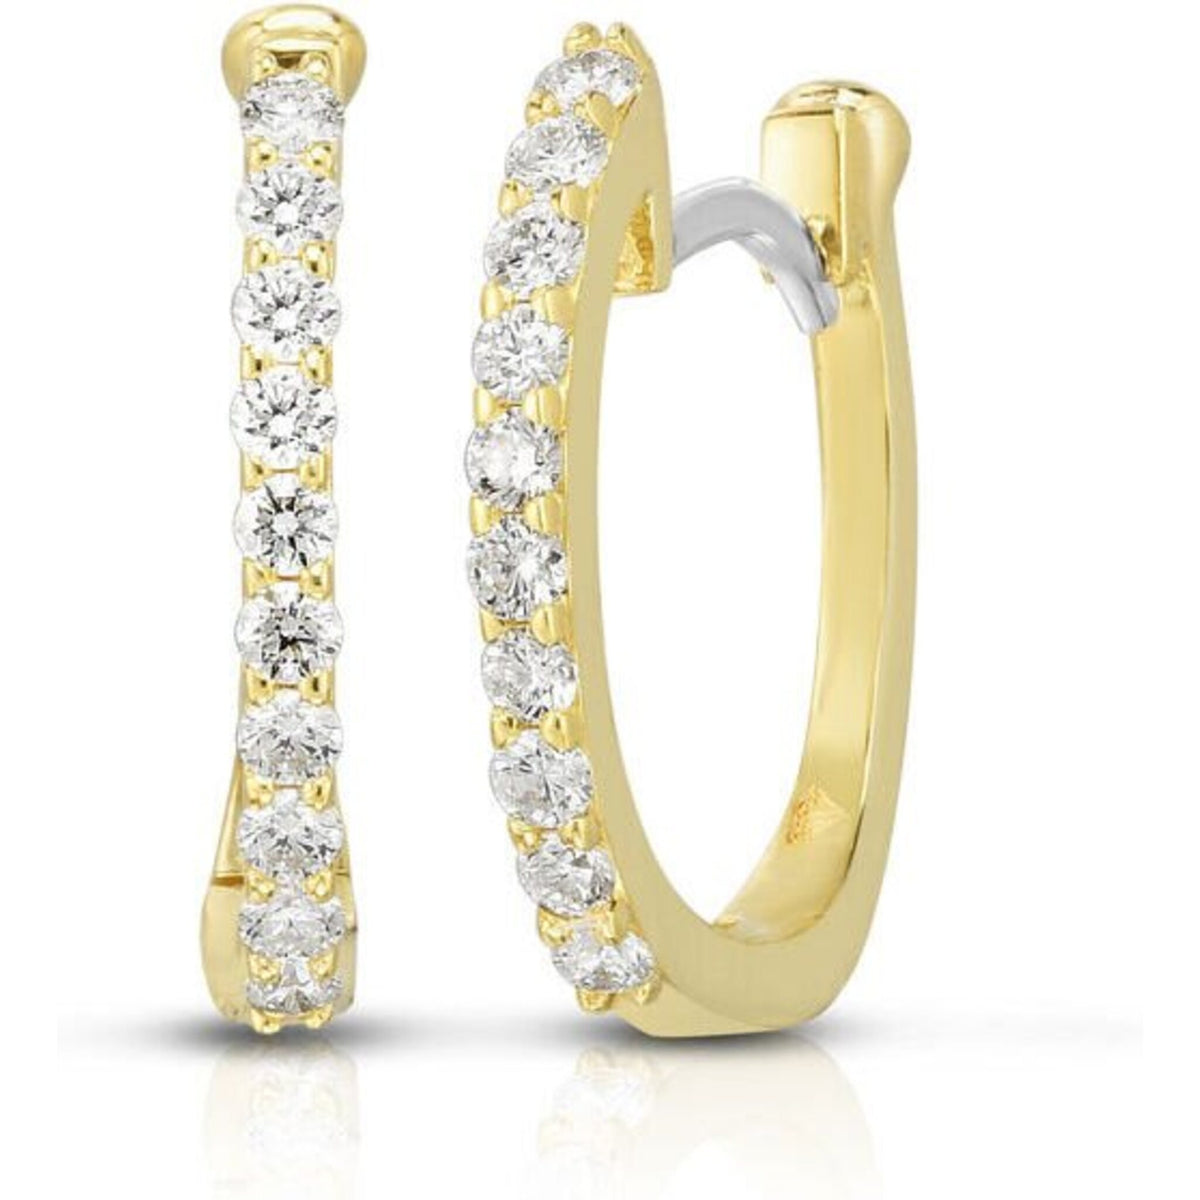 Roberto Coin - Pave Small Diamond Hoop Huggy Earrings in 18K Yellow Gold